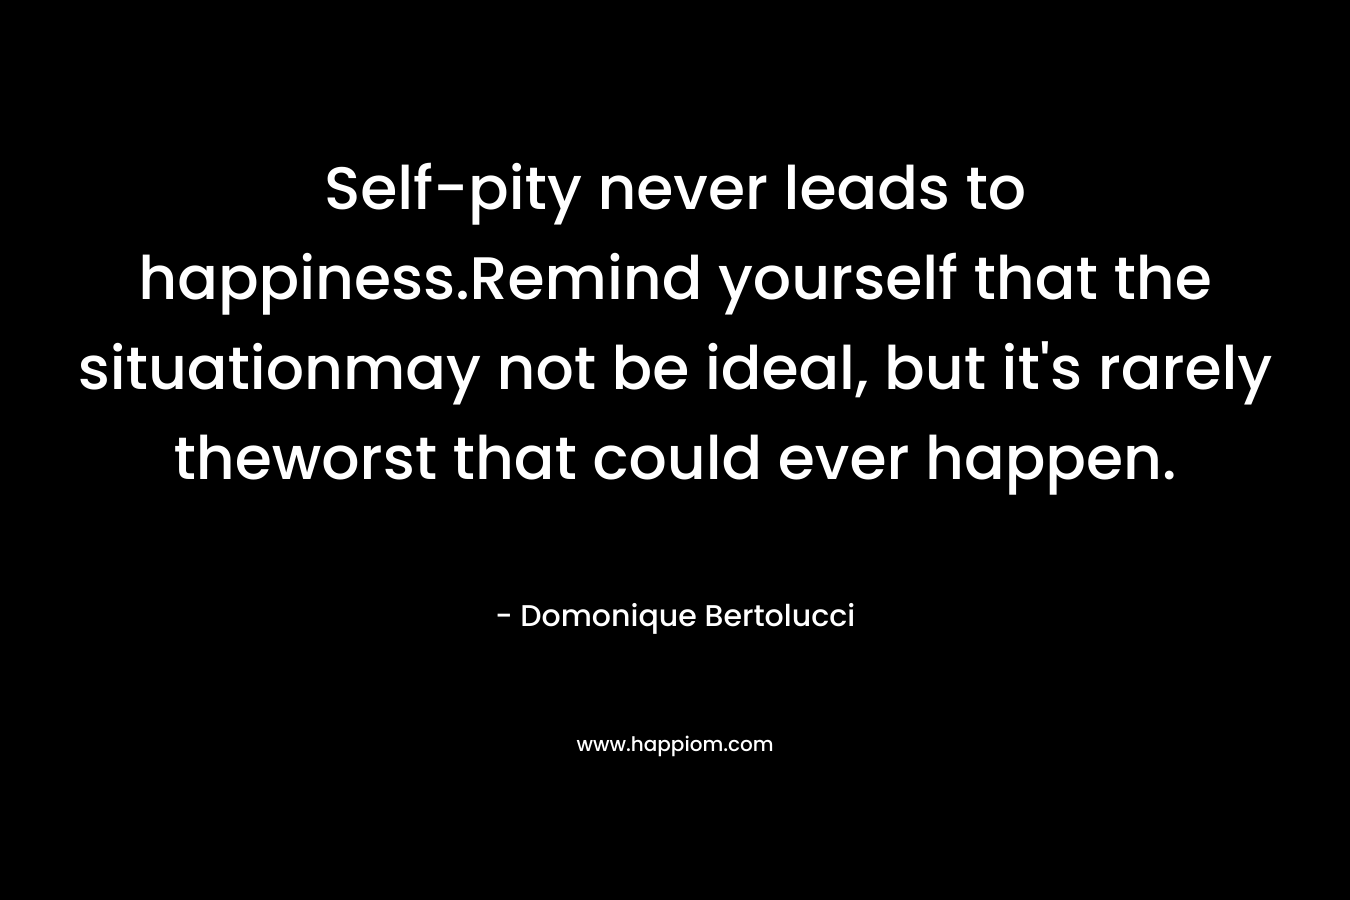 Self-pity never leads to happiness.Remind yourself that the situationmay not be ideal, but it’s rarely theworst that could ever happen. – Domonique Bertolucci